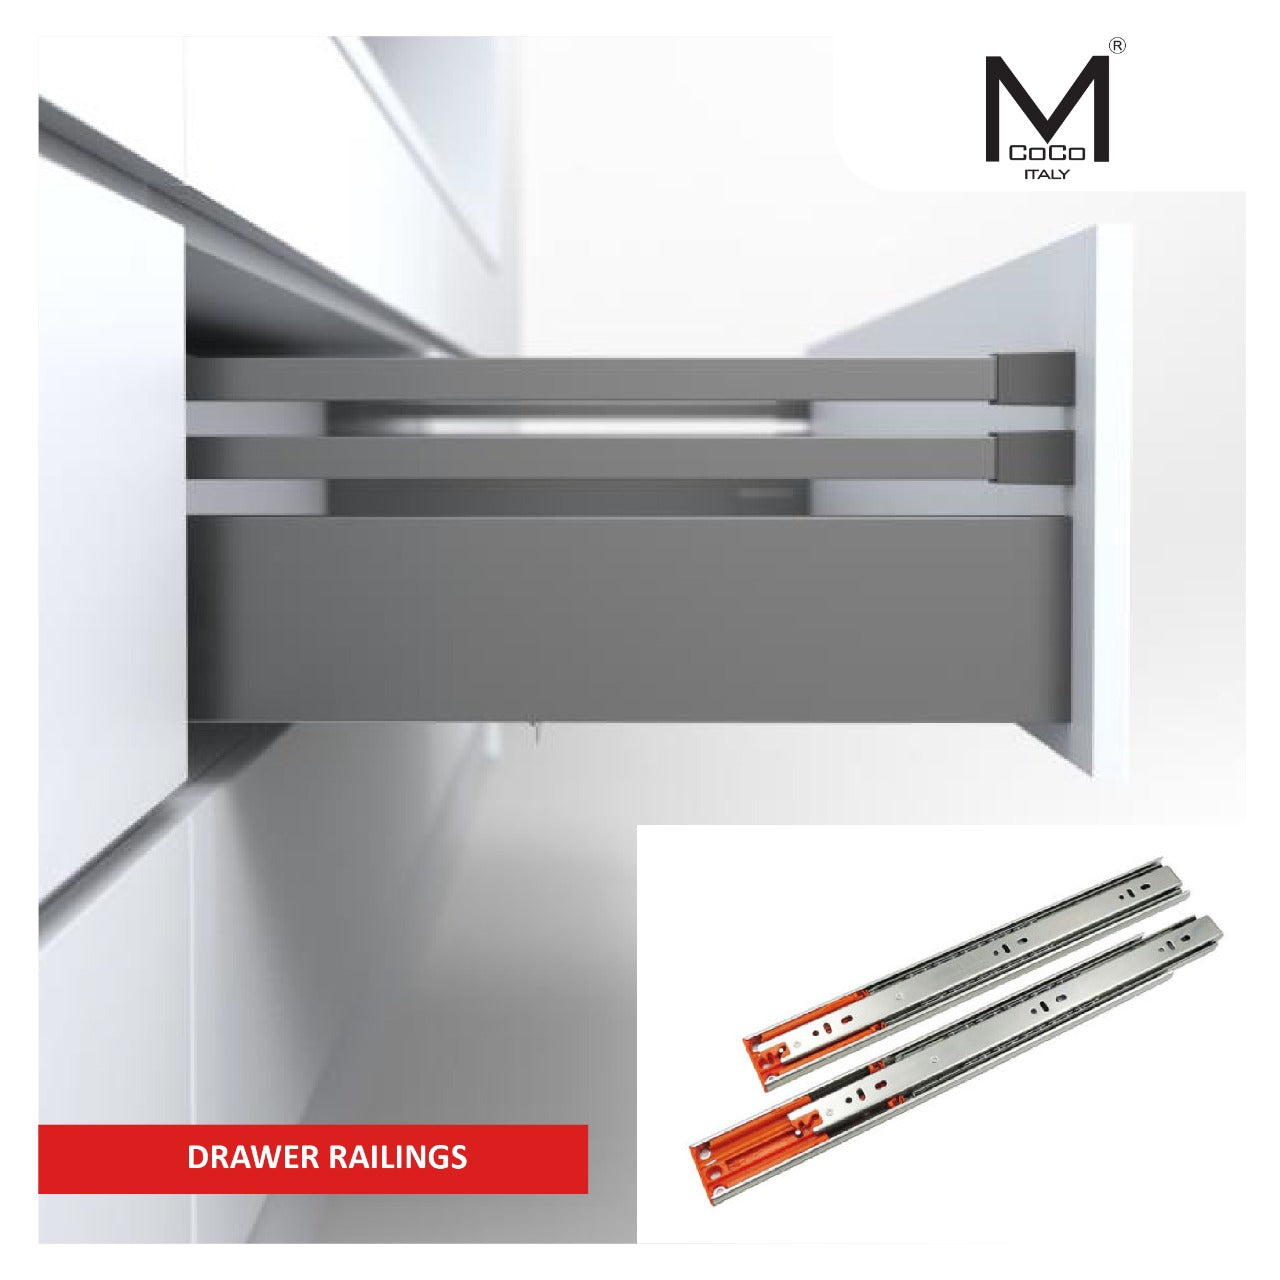 Mcoco Drawer Railings - High-quality railings for smooth and reliable drawer movement.